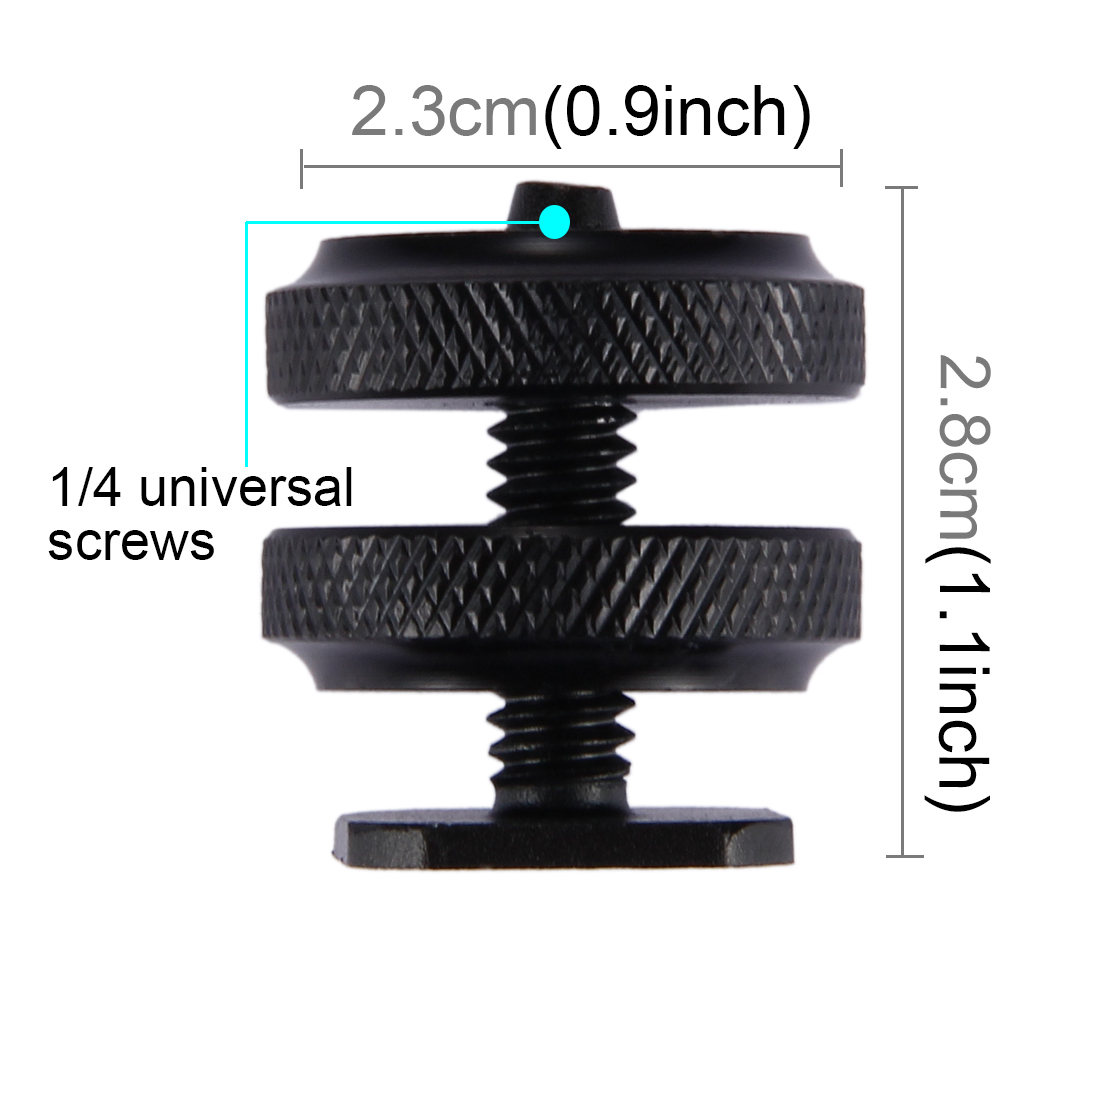 PULUZ Reinforced Hot Shoe 1/4 inch Screw Adapter with Double Nut for DSLR Cameras, GoPro